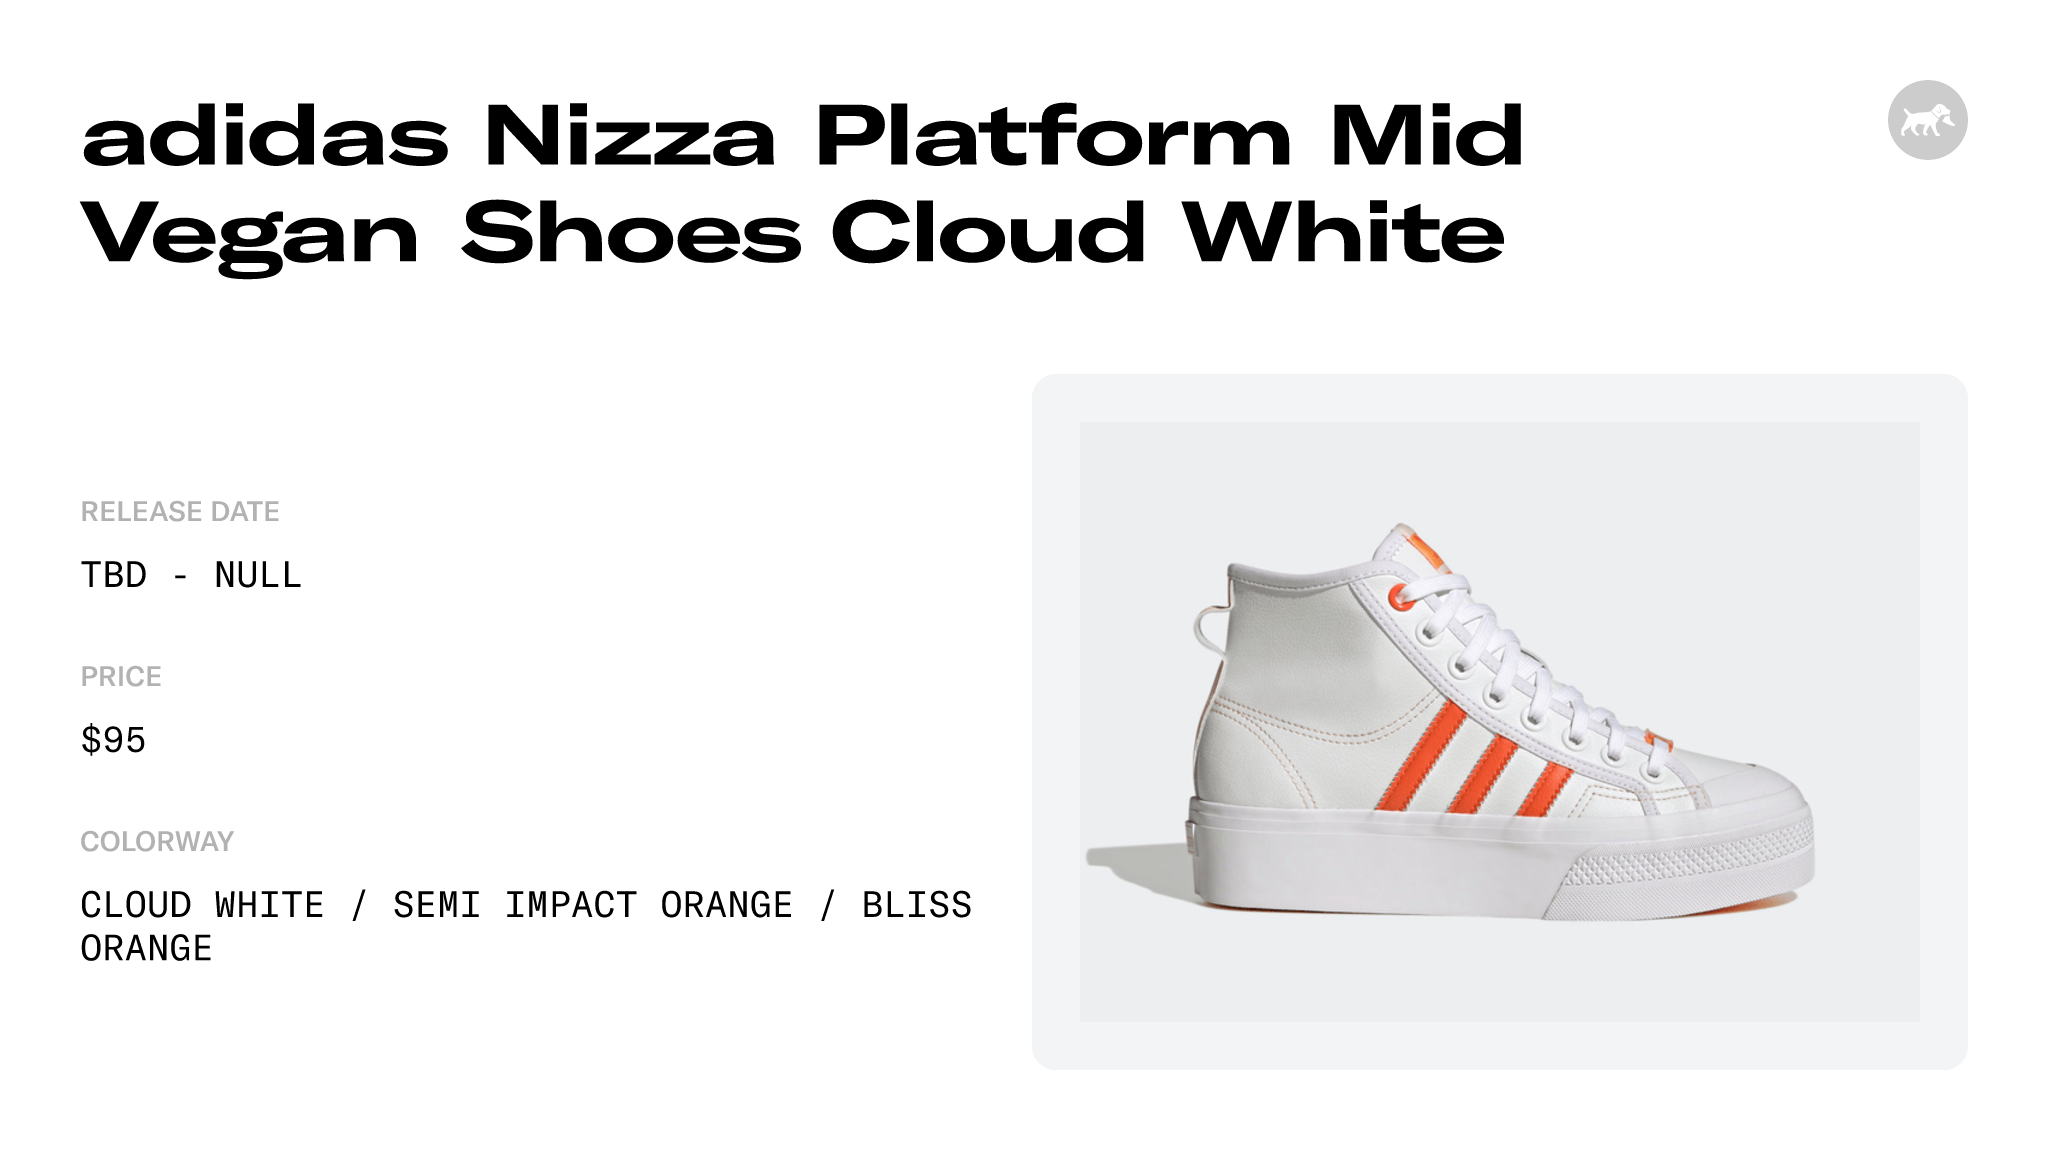 adidas Nizza Platform Mid Raffles Shoes and - Cloud White Date GY1897 Vegan Release